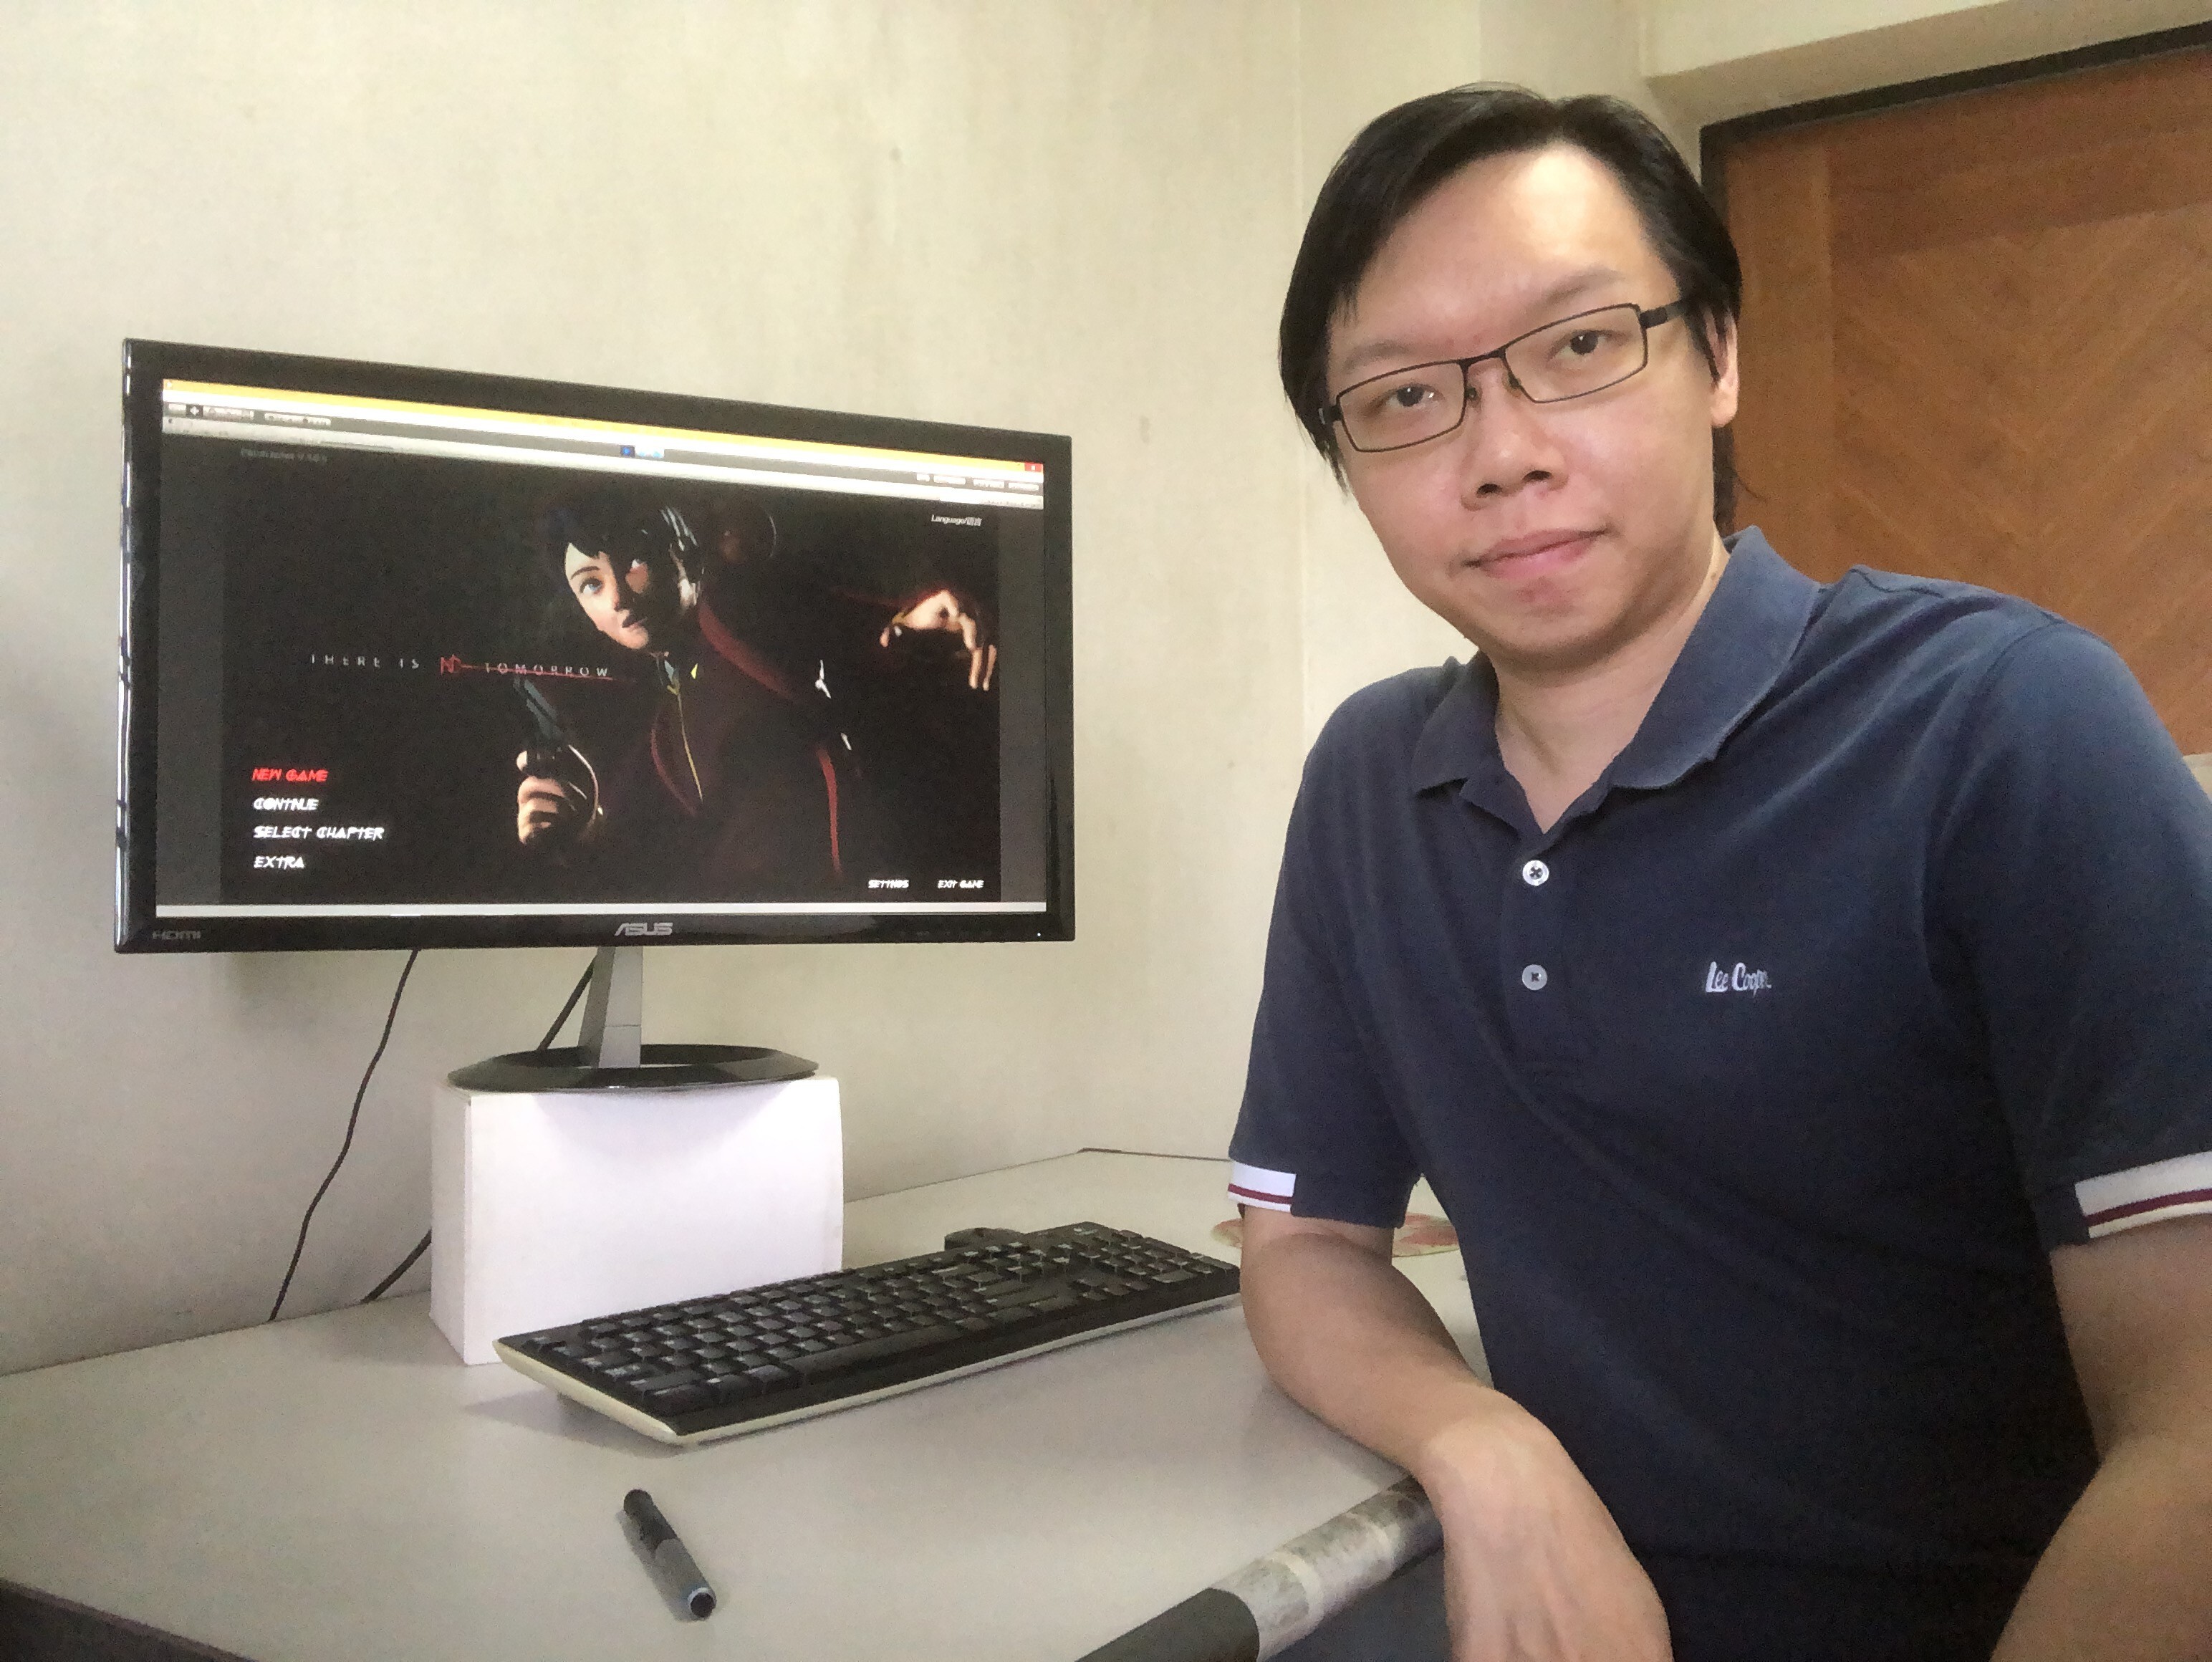 Singaporean game developer Choo Bin Yong made his game entirely on his own.